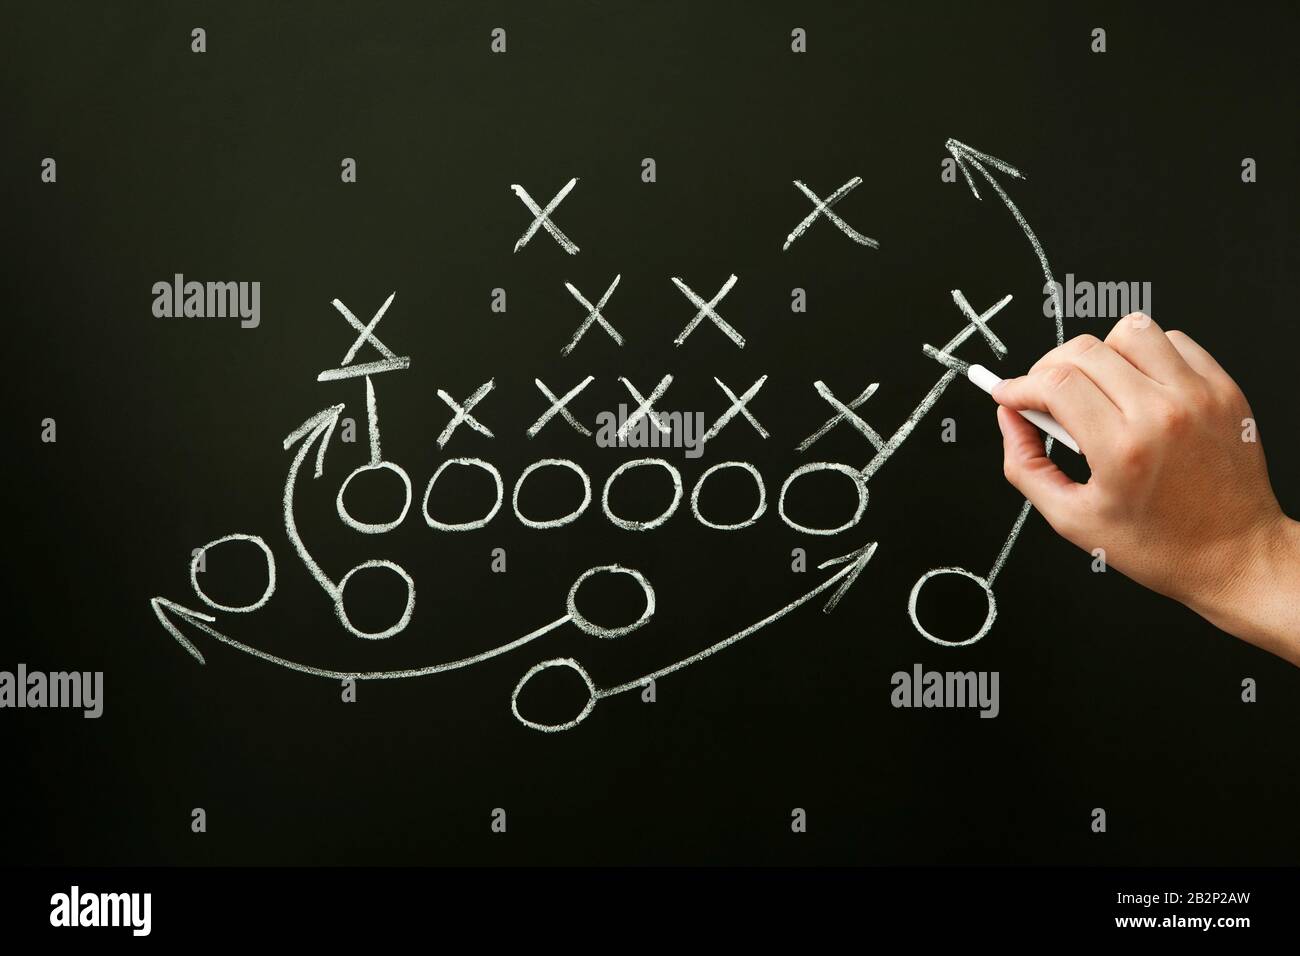 Coach drawing american football or rugby game playbook, strategy and tactics with chalk on blackboard. Stock Photo